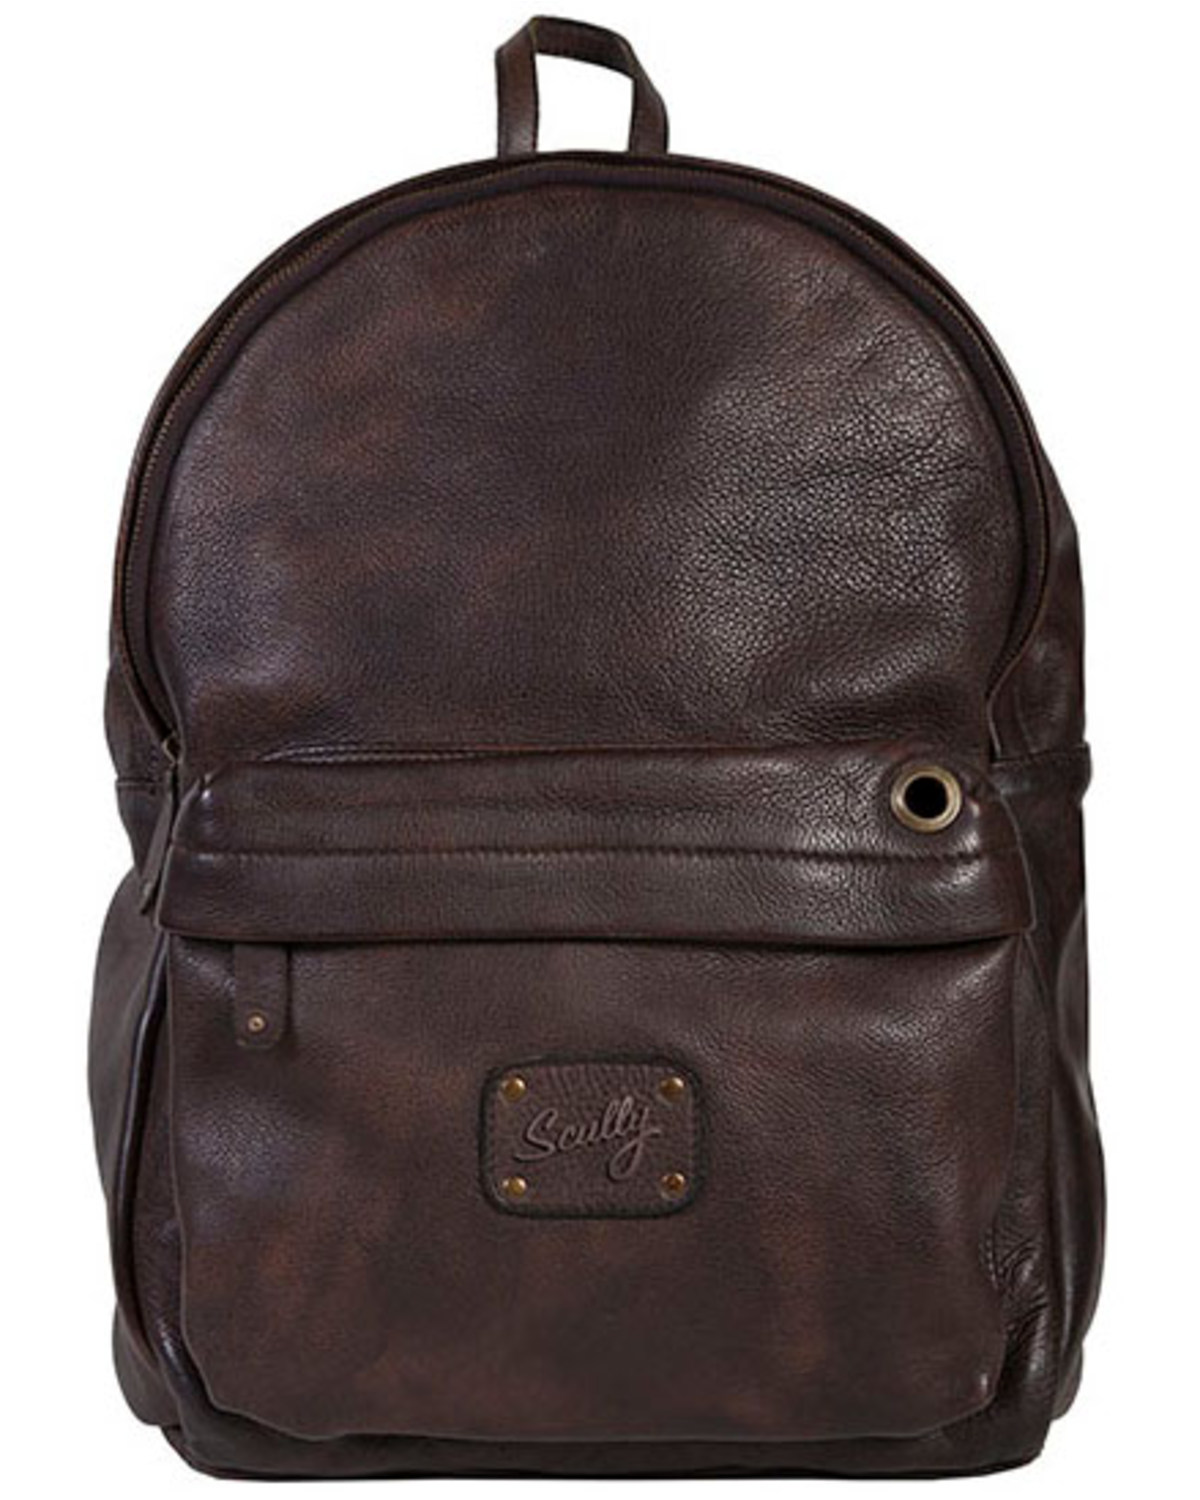 Scully Men's Leather Backpack